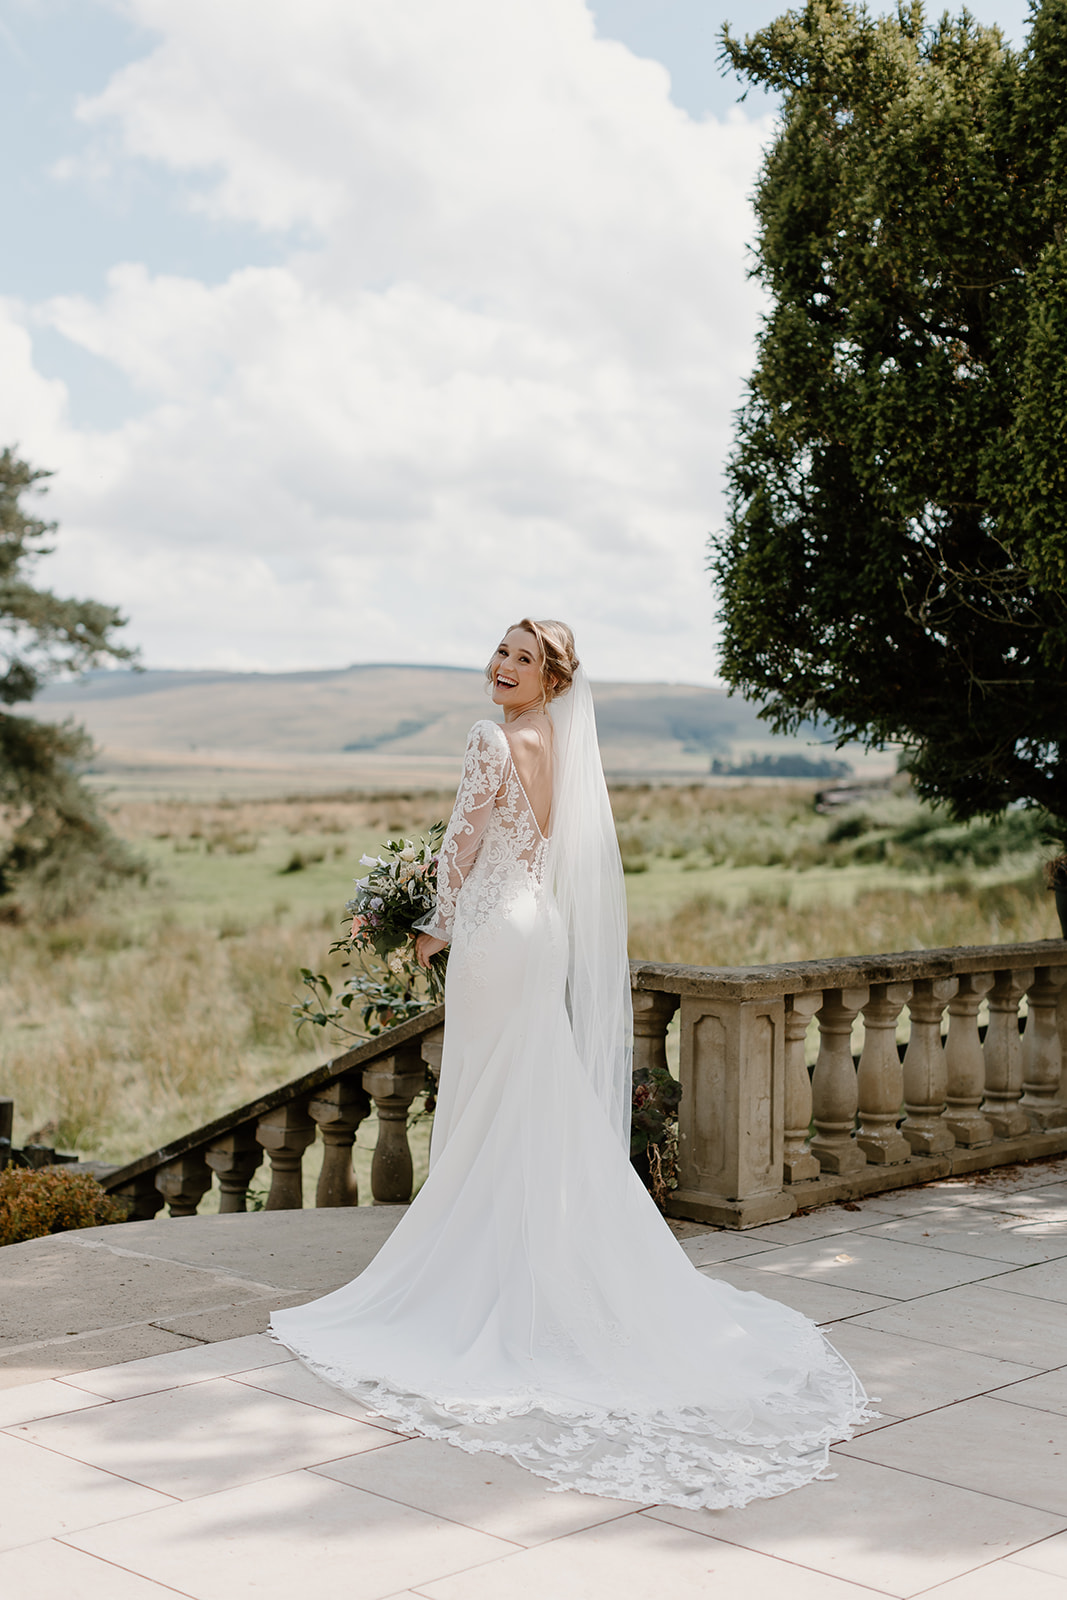 Bride In Crepe Wedding Dress With Lace Sleeves Called Nikki By Maggie Sottero